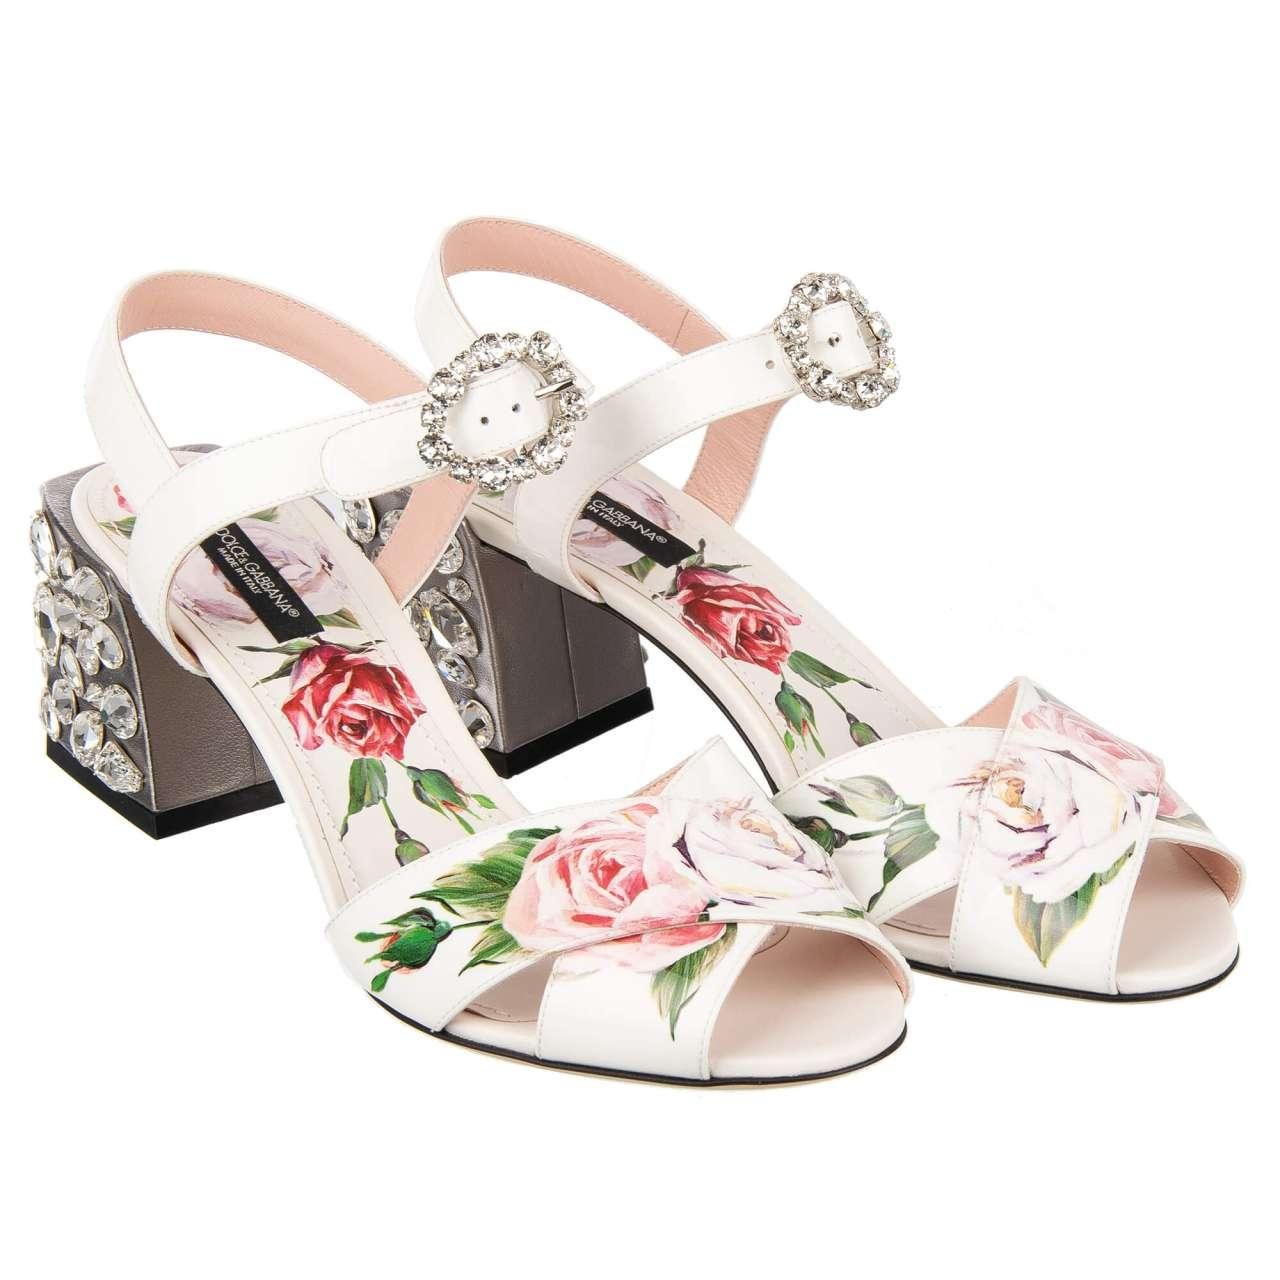 D&G Patent Leather Rose Pumps Sandals KEIRA with Crystal Heel White Silver 35 For Sale